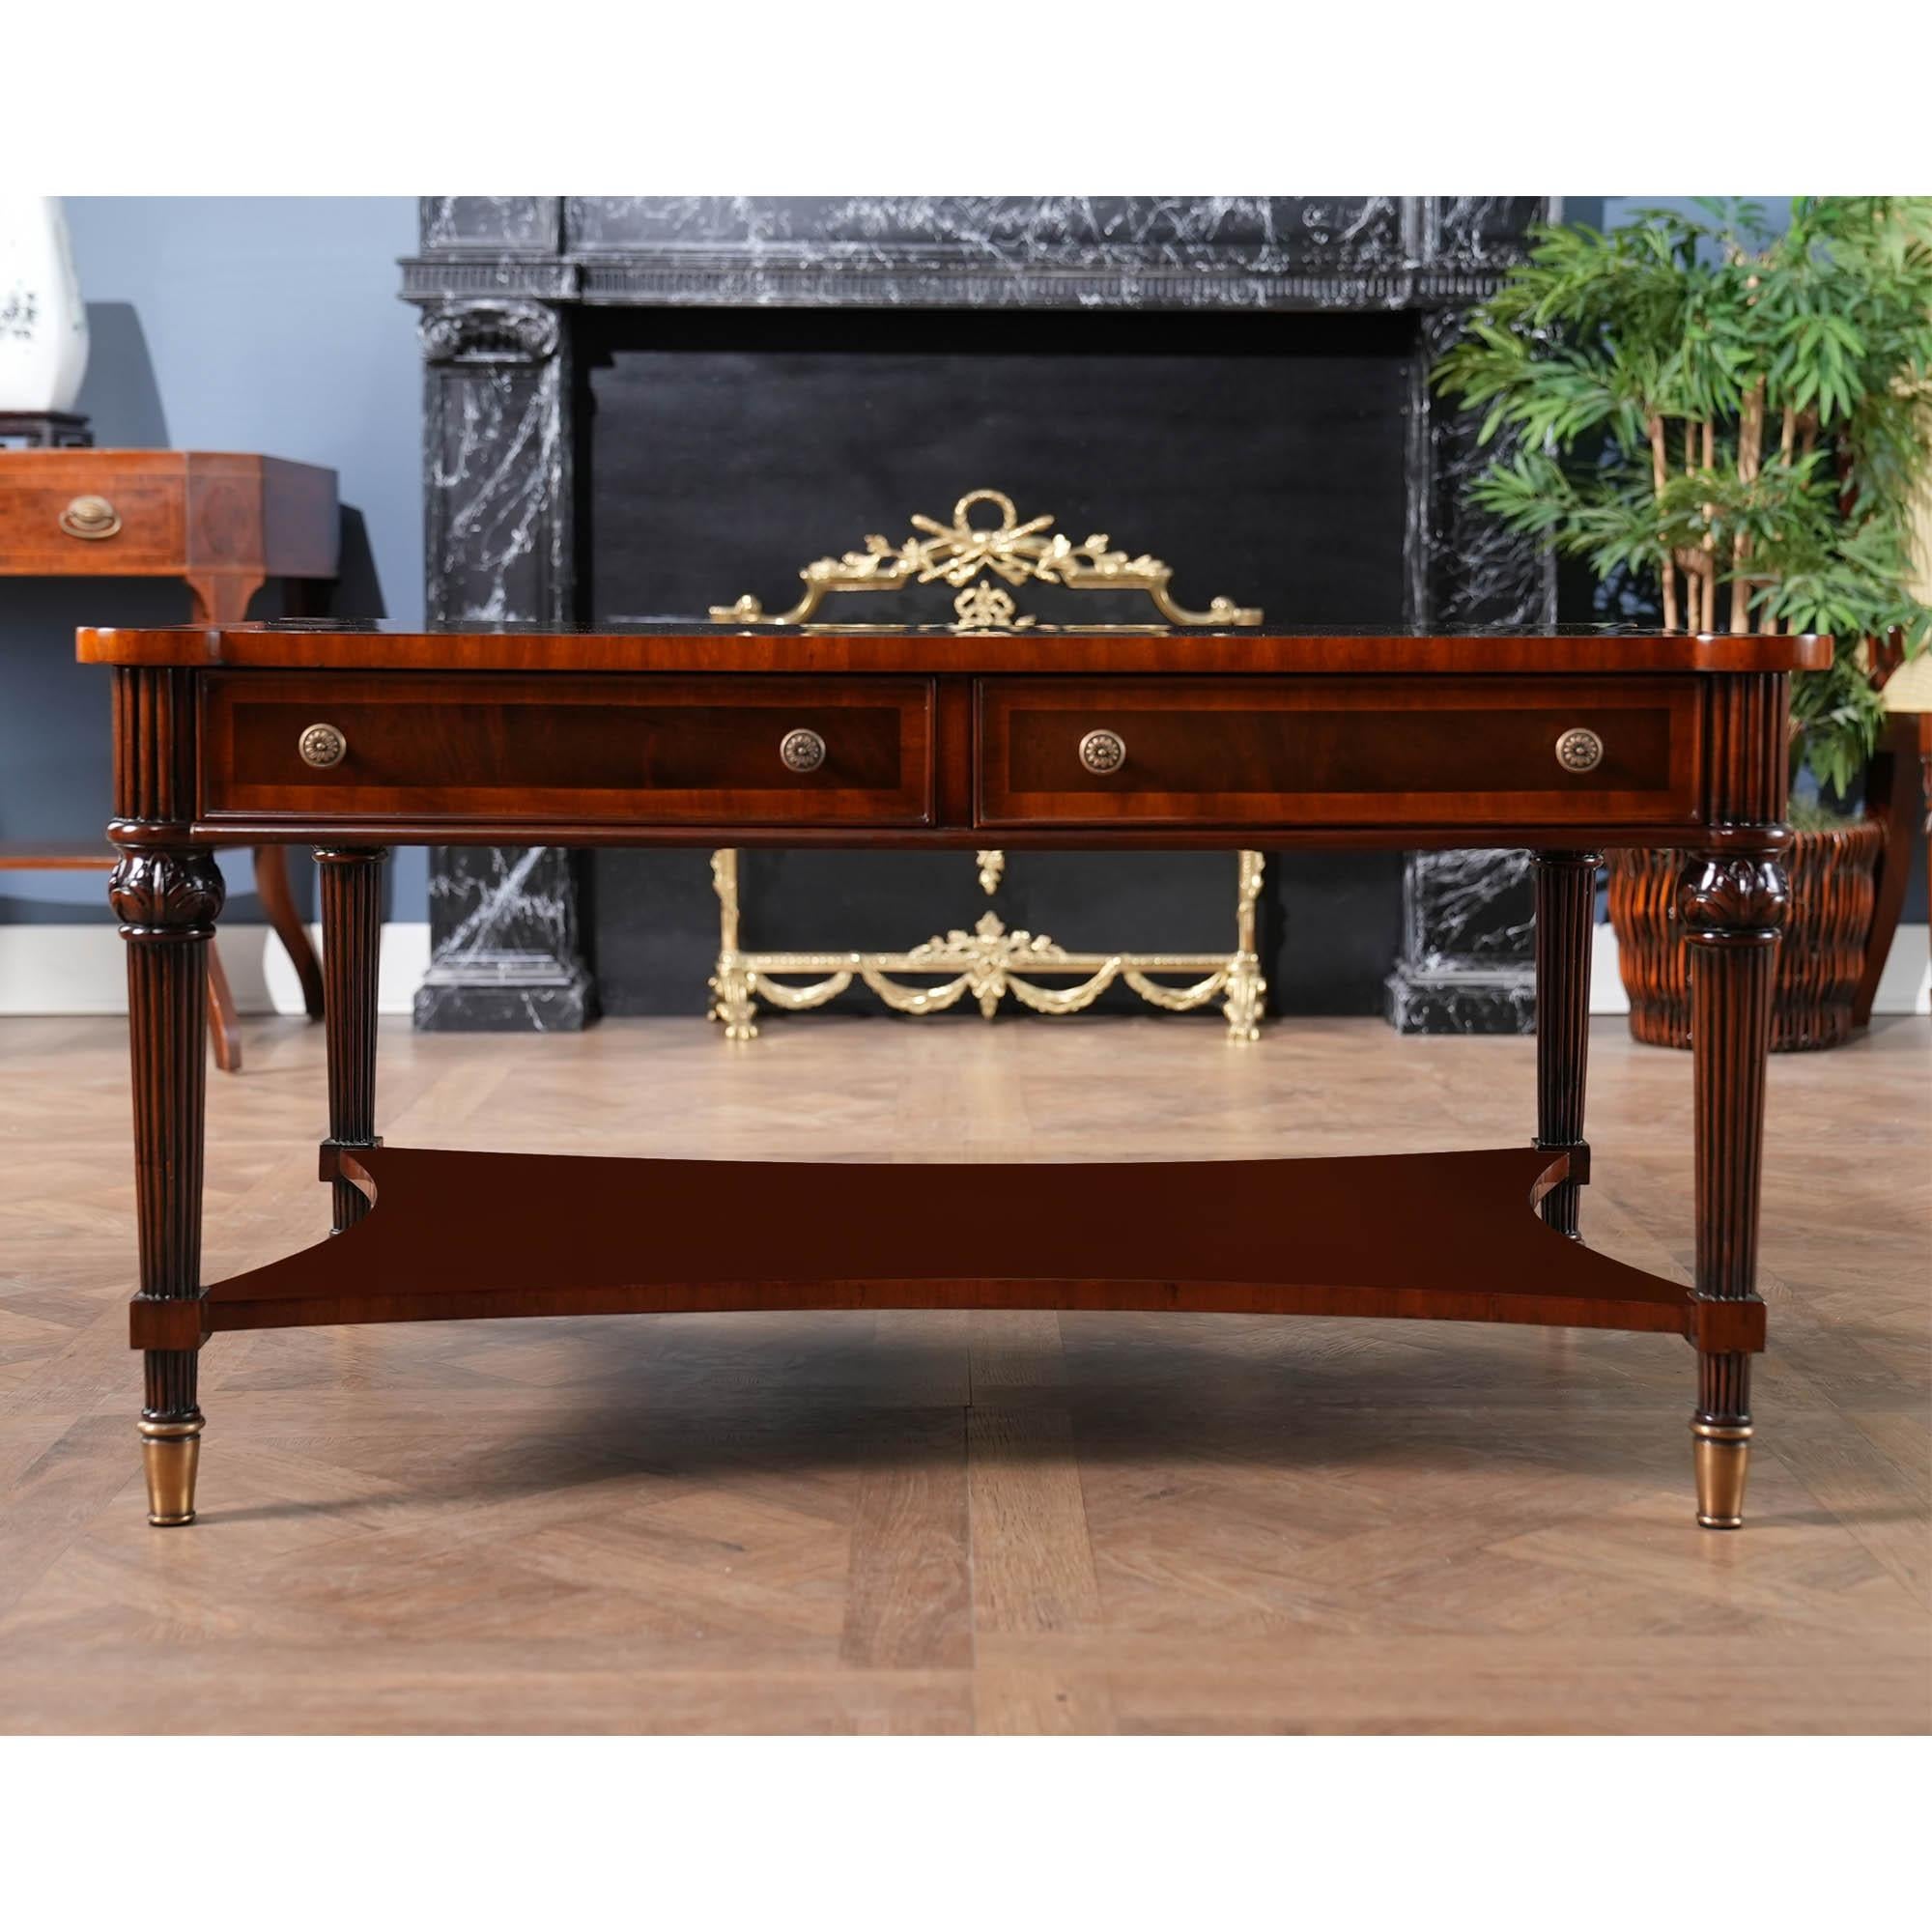 A Rectangular Mahogany Coffee Table from Niagara Furniture with all of the bells and whistles including four drawers, reeded legs, solid brass capped feet and cookie shaped, rounded corners. Great quality construction and attention to detail make